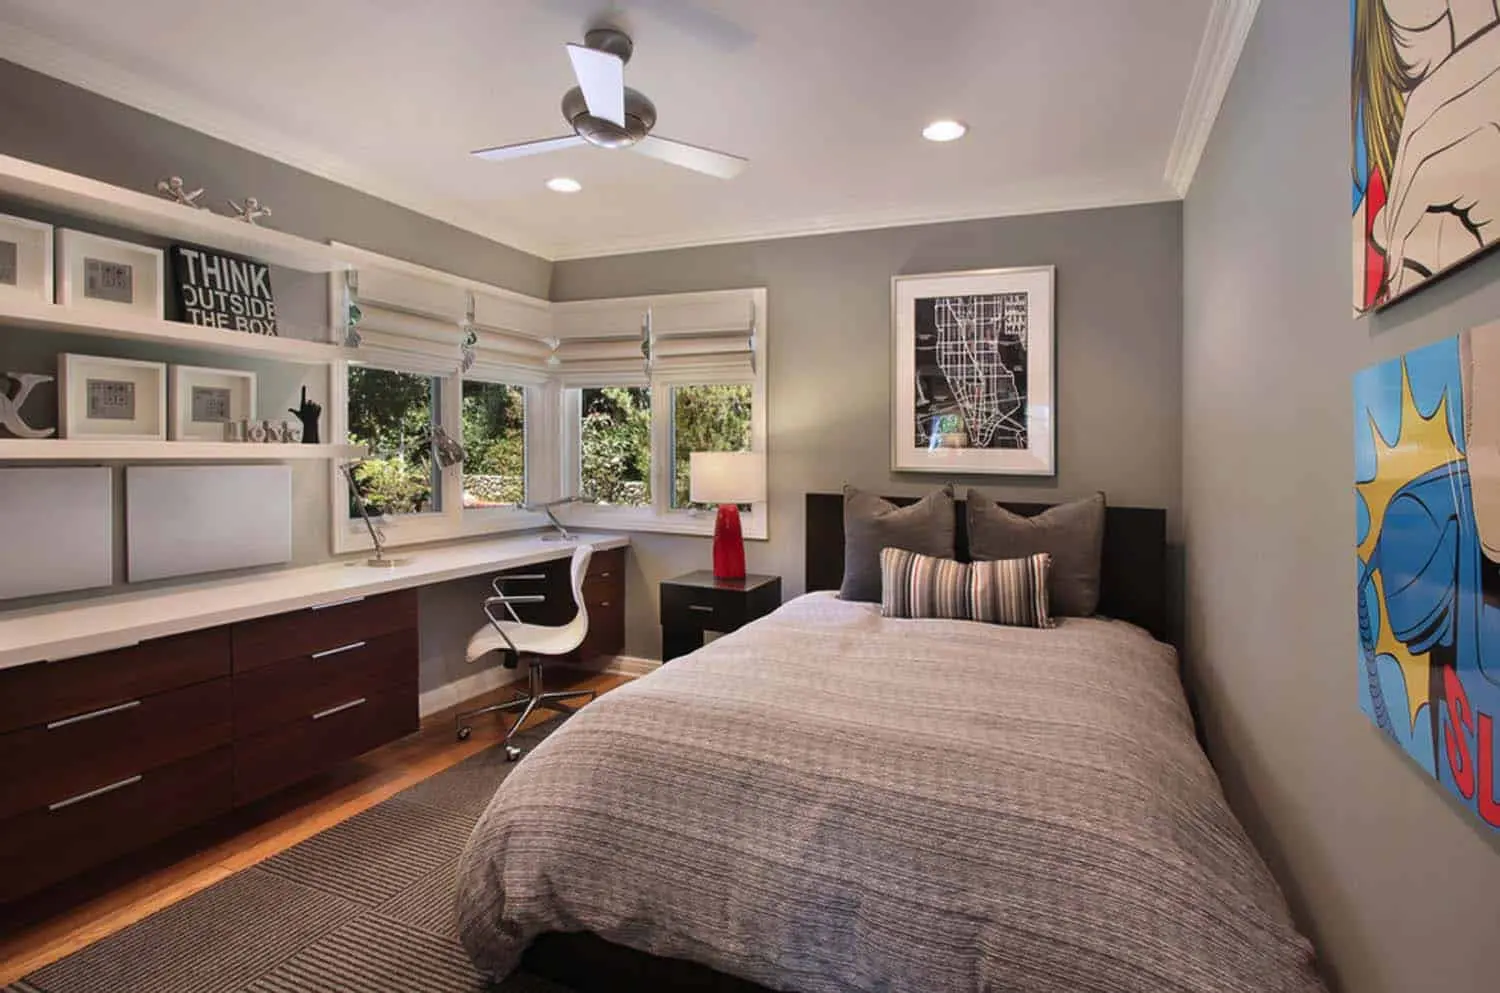 Private Bedroom Or Home Office